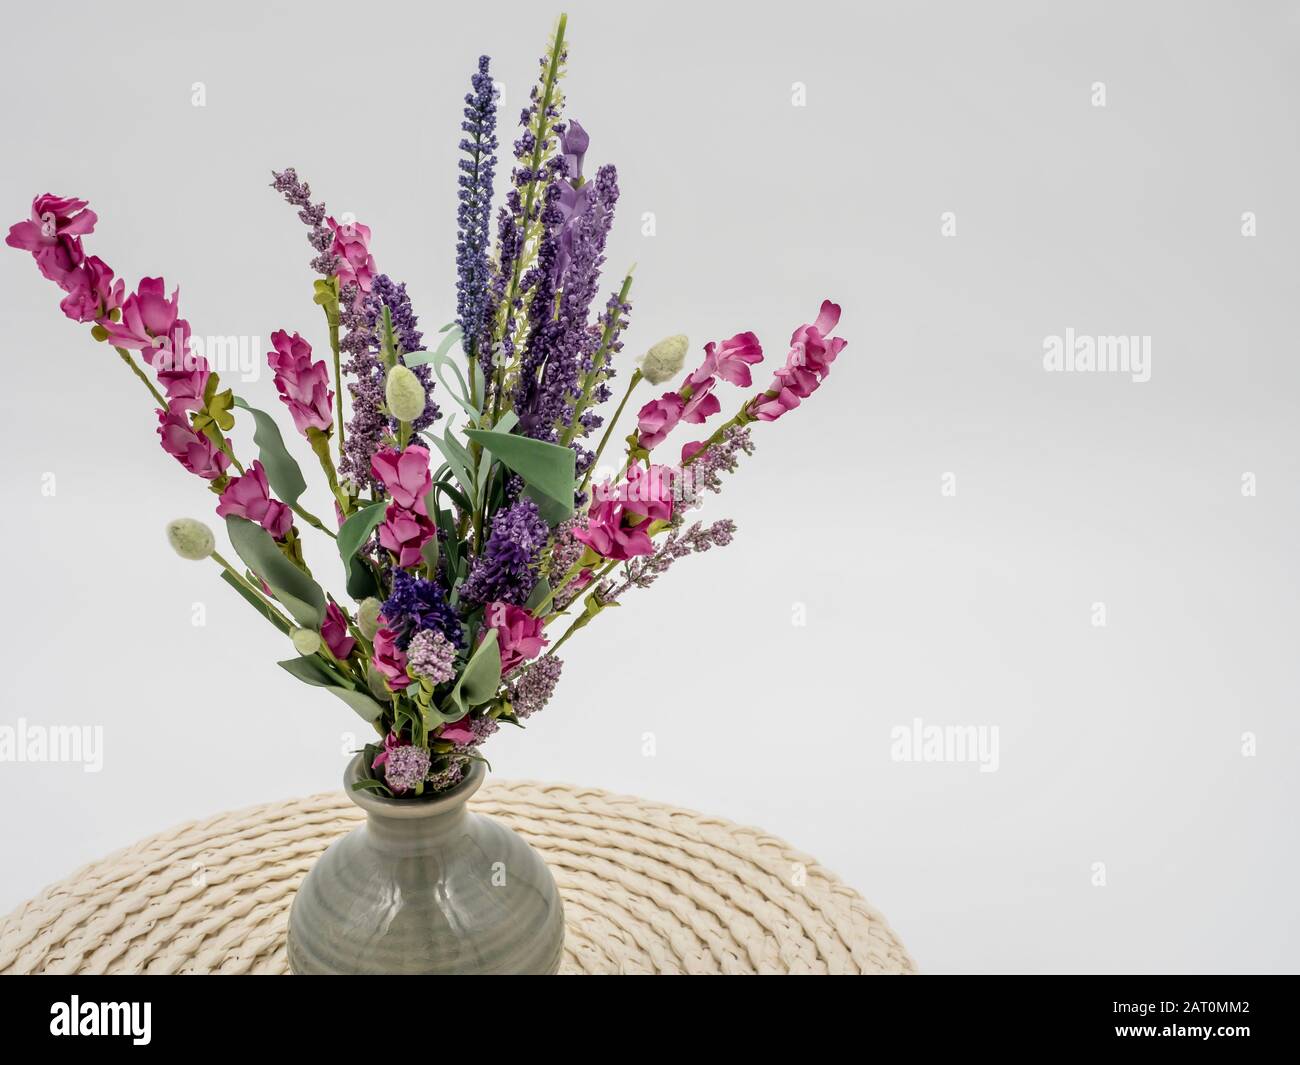 Purple And Pink Artificial Wildflowers In A Gray Ceramic Vase And An Off White Round Placemat Stock Photo Alamy